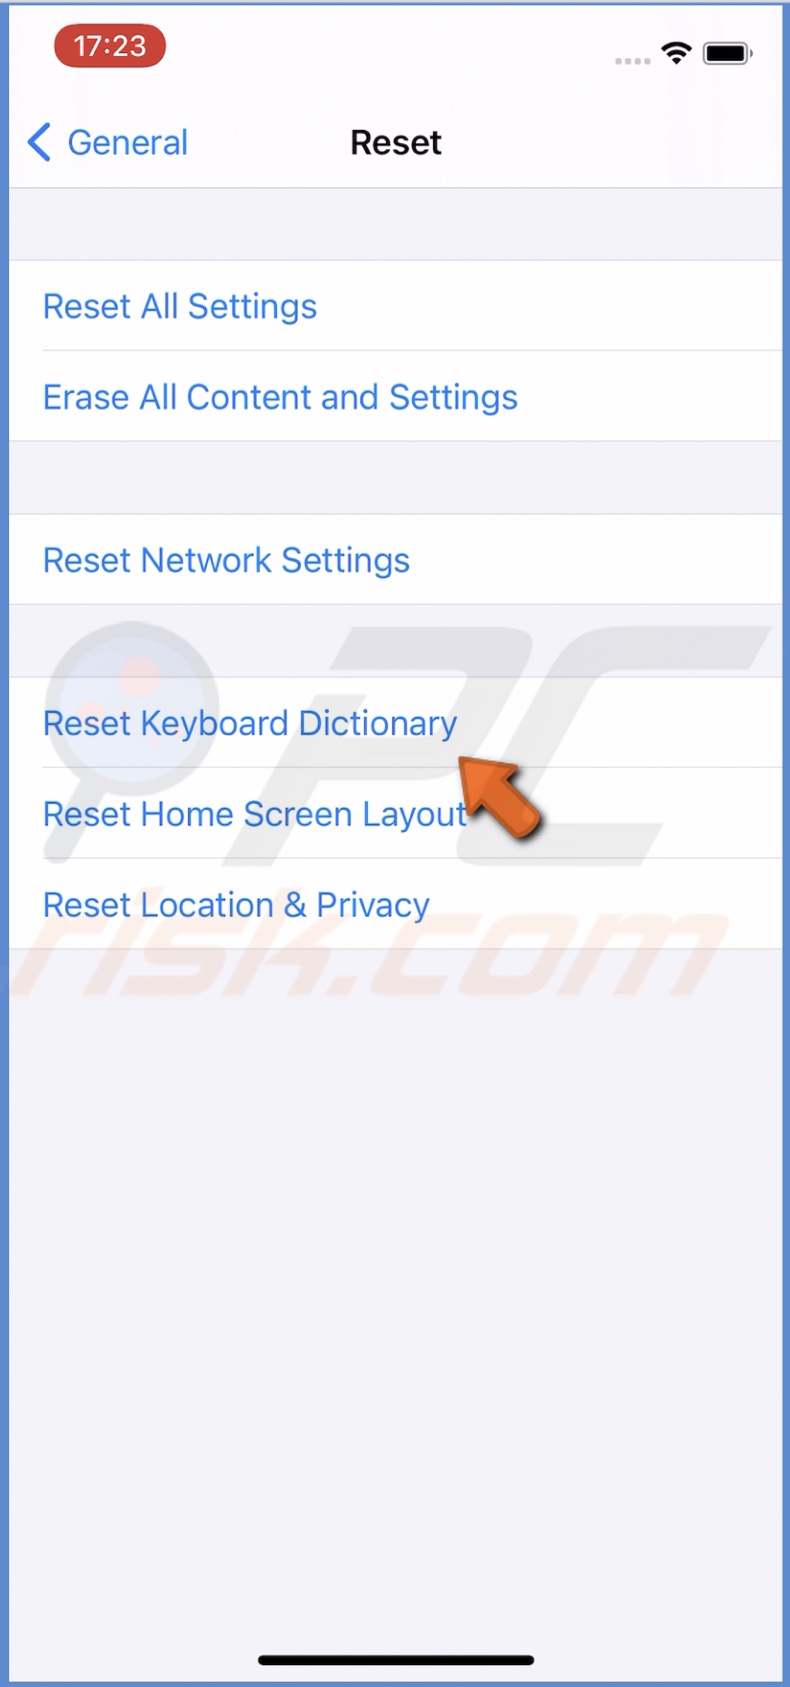 Tap on Reset Keyboard Dictionary